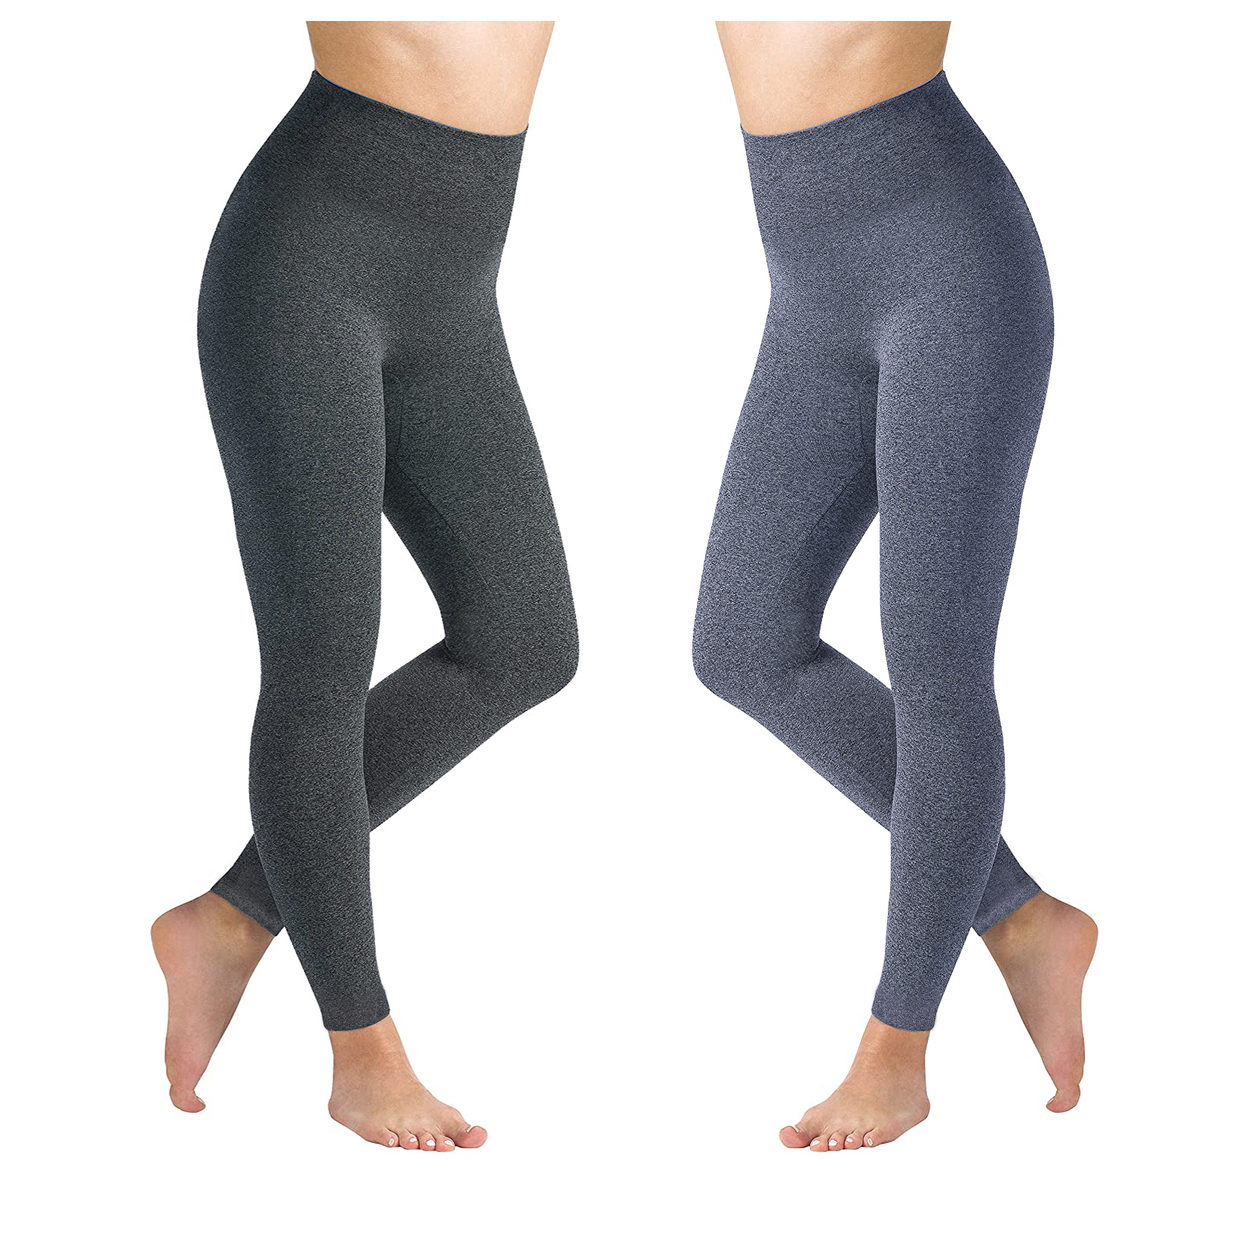 2-Pack: Women's High Waisted Ultra Soft Fleece Lined Warm Marled Leggings(Available In Plus Sizes) - Charcoal & Navy, X-large